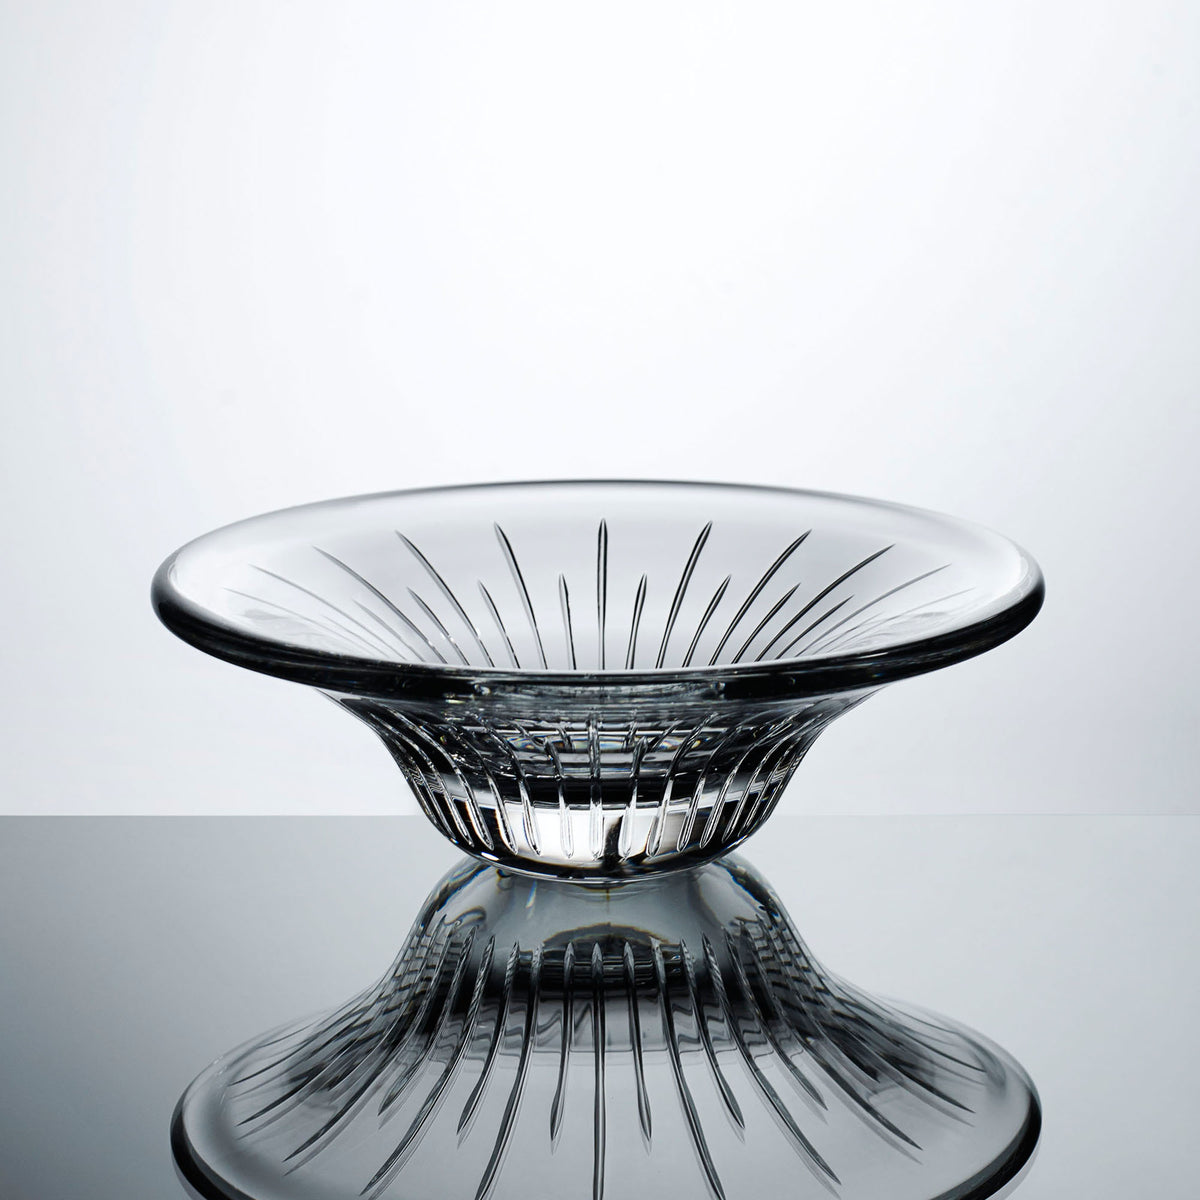 Trafalgar Serving Dish | Luxury Home Accessories & Gifts | LINLEY